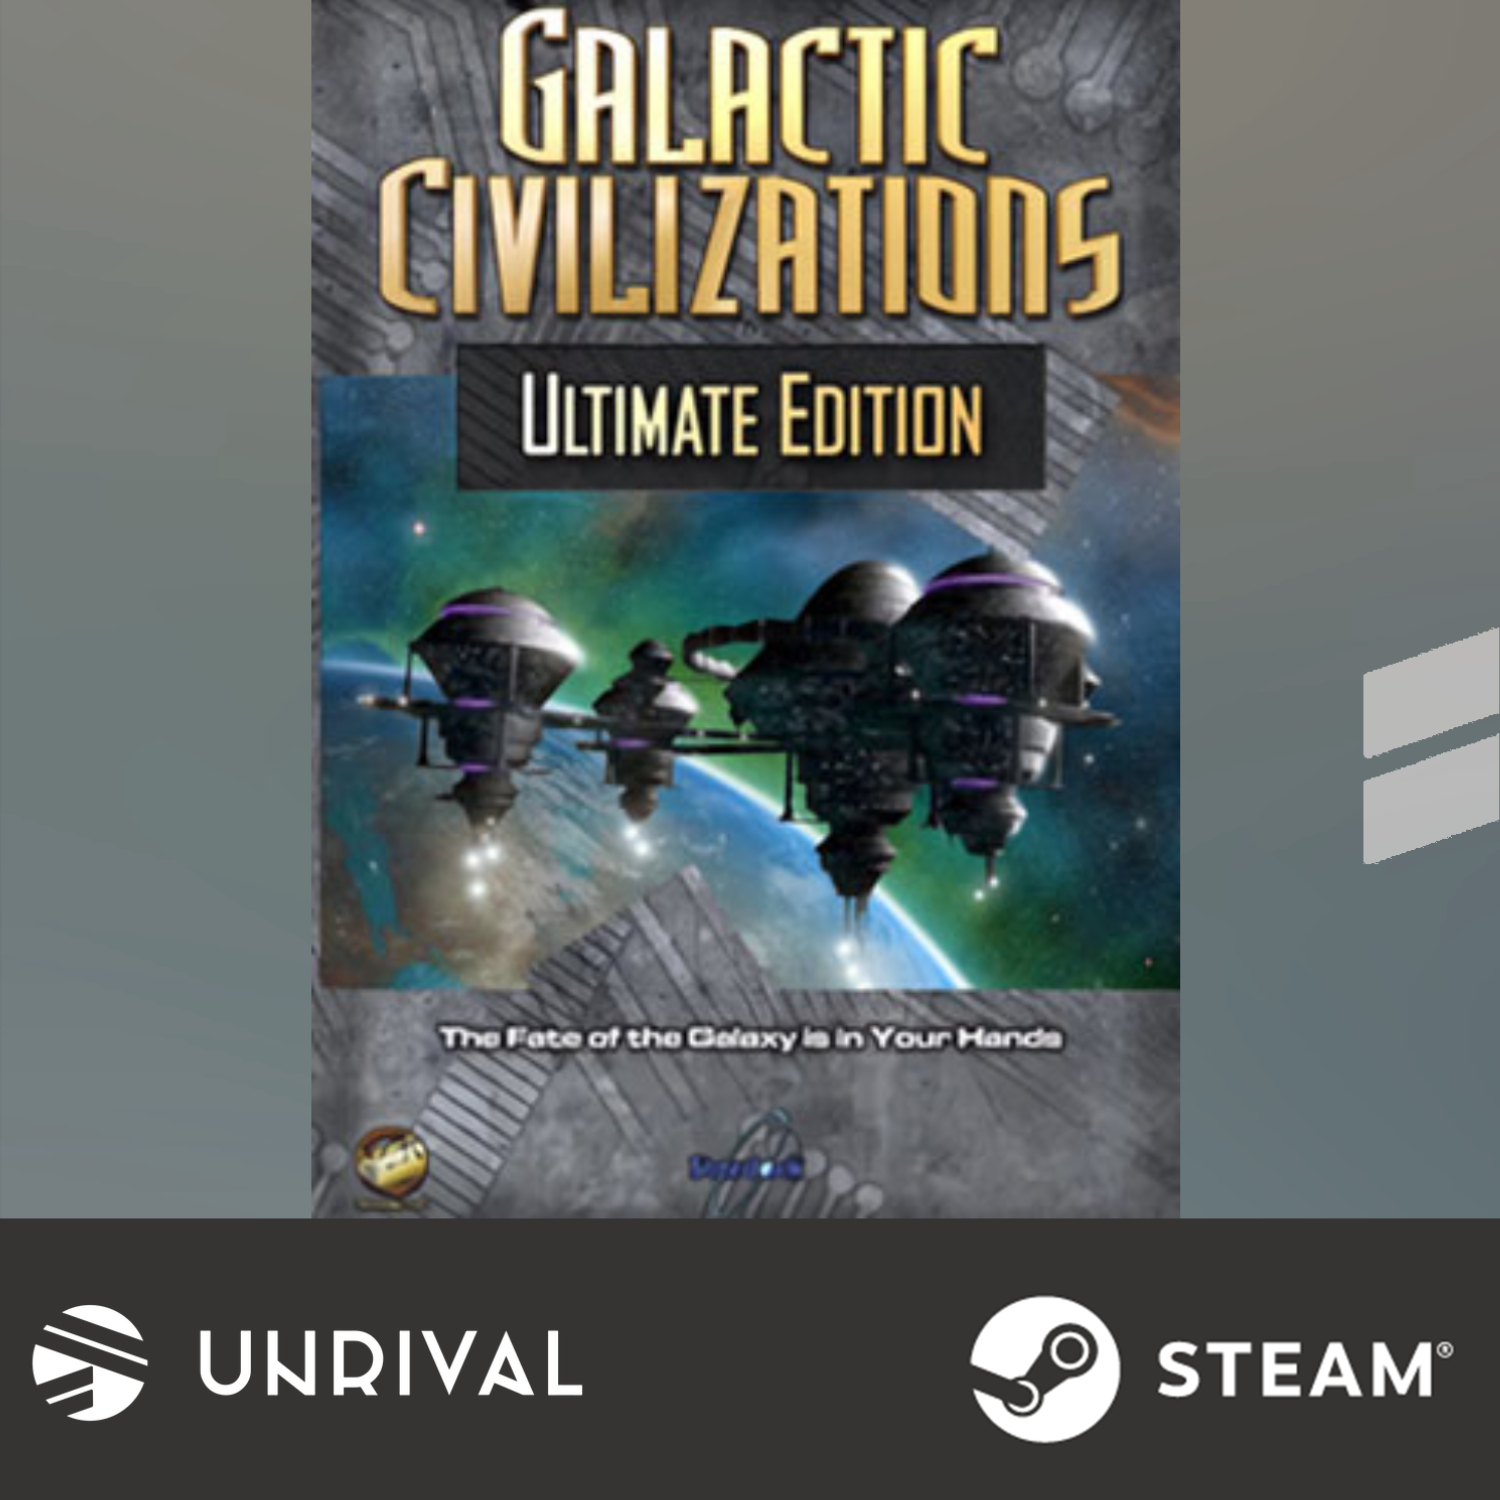 Galactic Civilizations I: Ultimate Edition PC Digital Download Game (Single Player) - Unrival